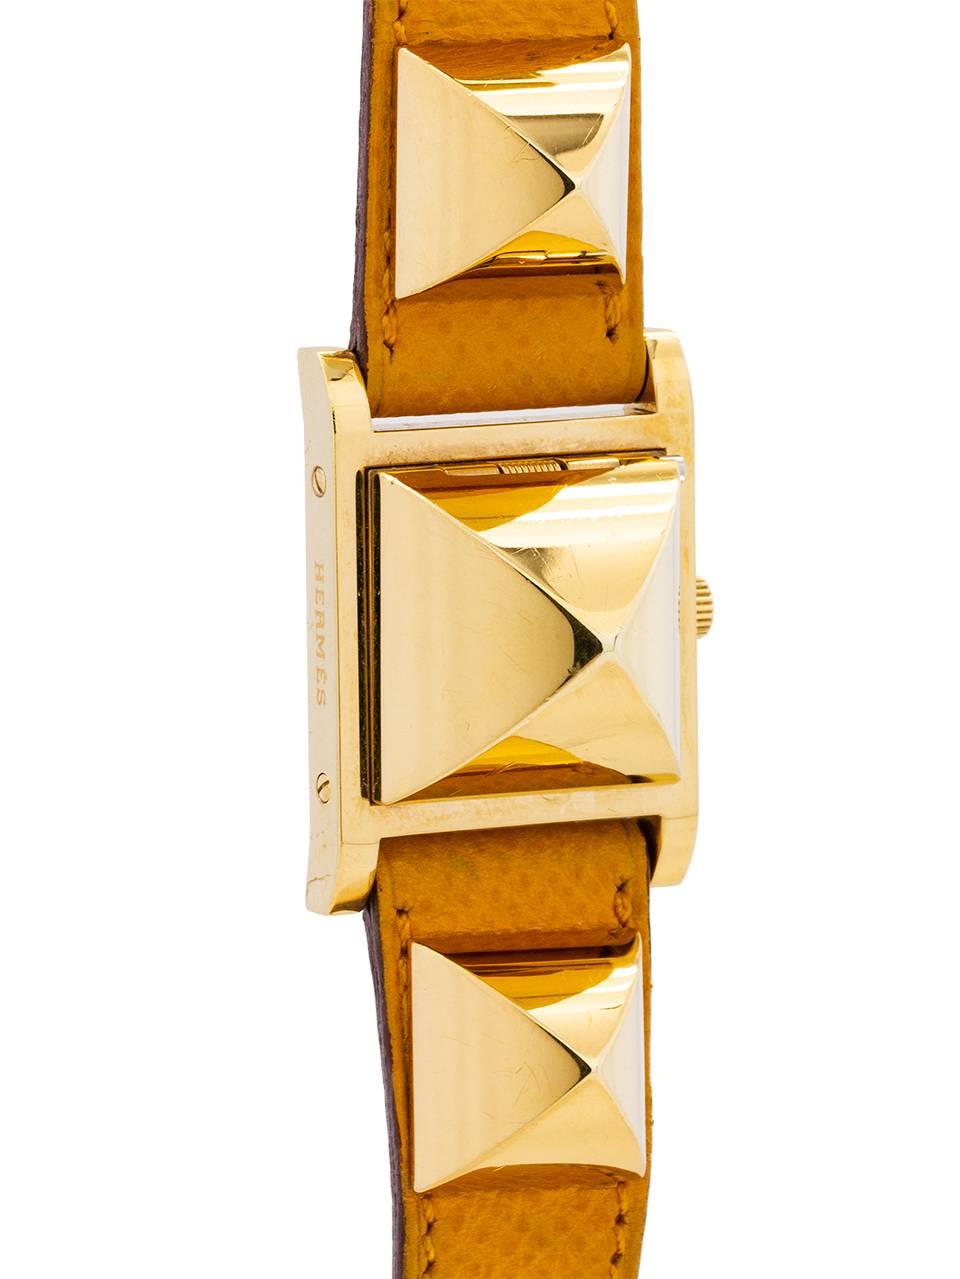 
Hermes “Medor” cabochon shape pyramid design lady’s gold plate wristwatch with stainless steel case back. This eye catching and recognizable design features 2 pyramid shaped decorative elements secured to original yellow Hermes strap with centered